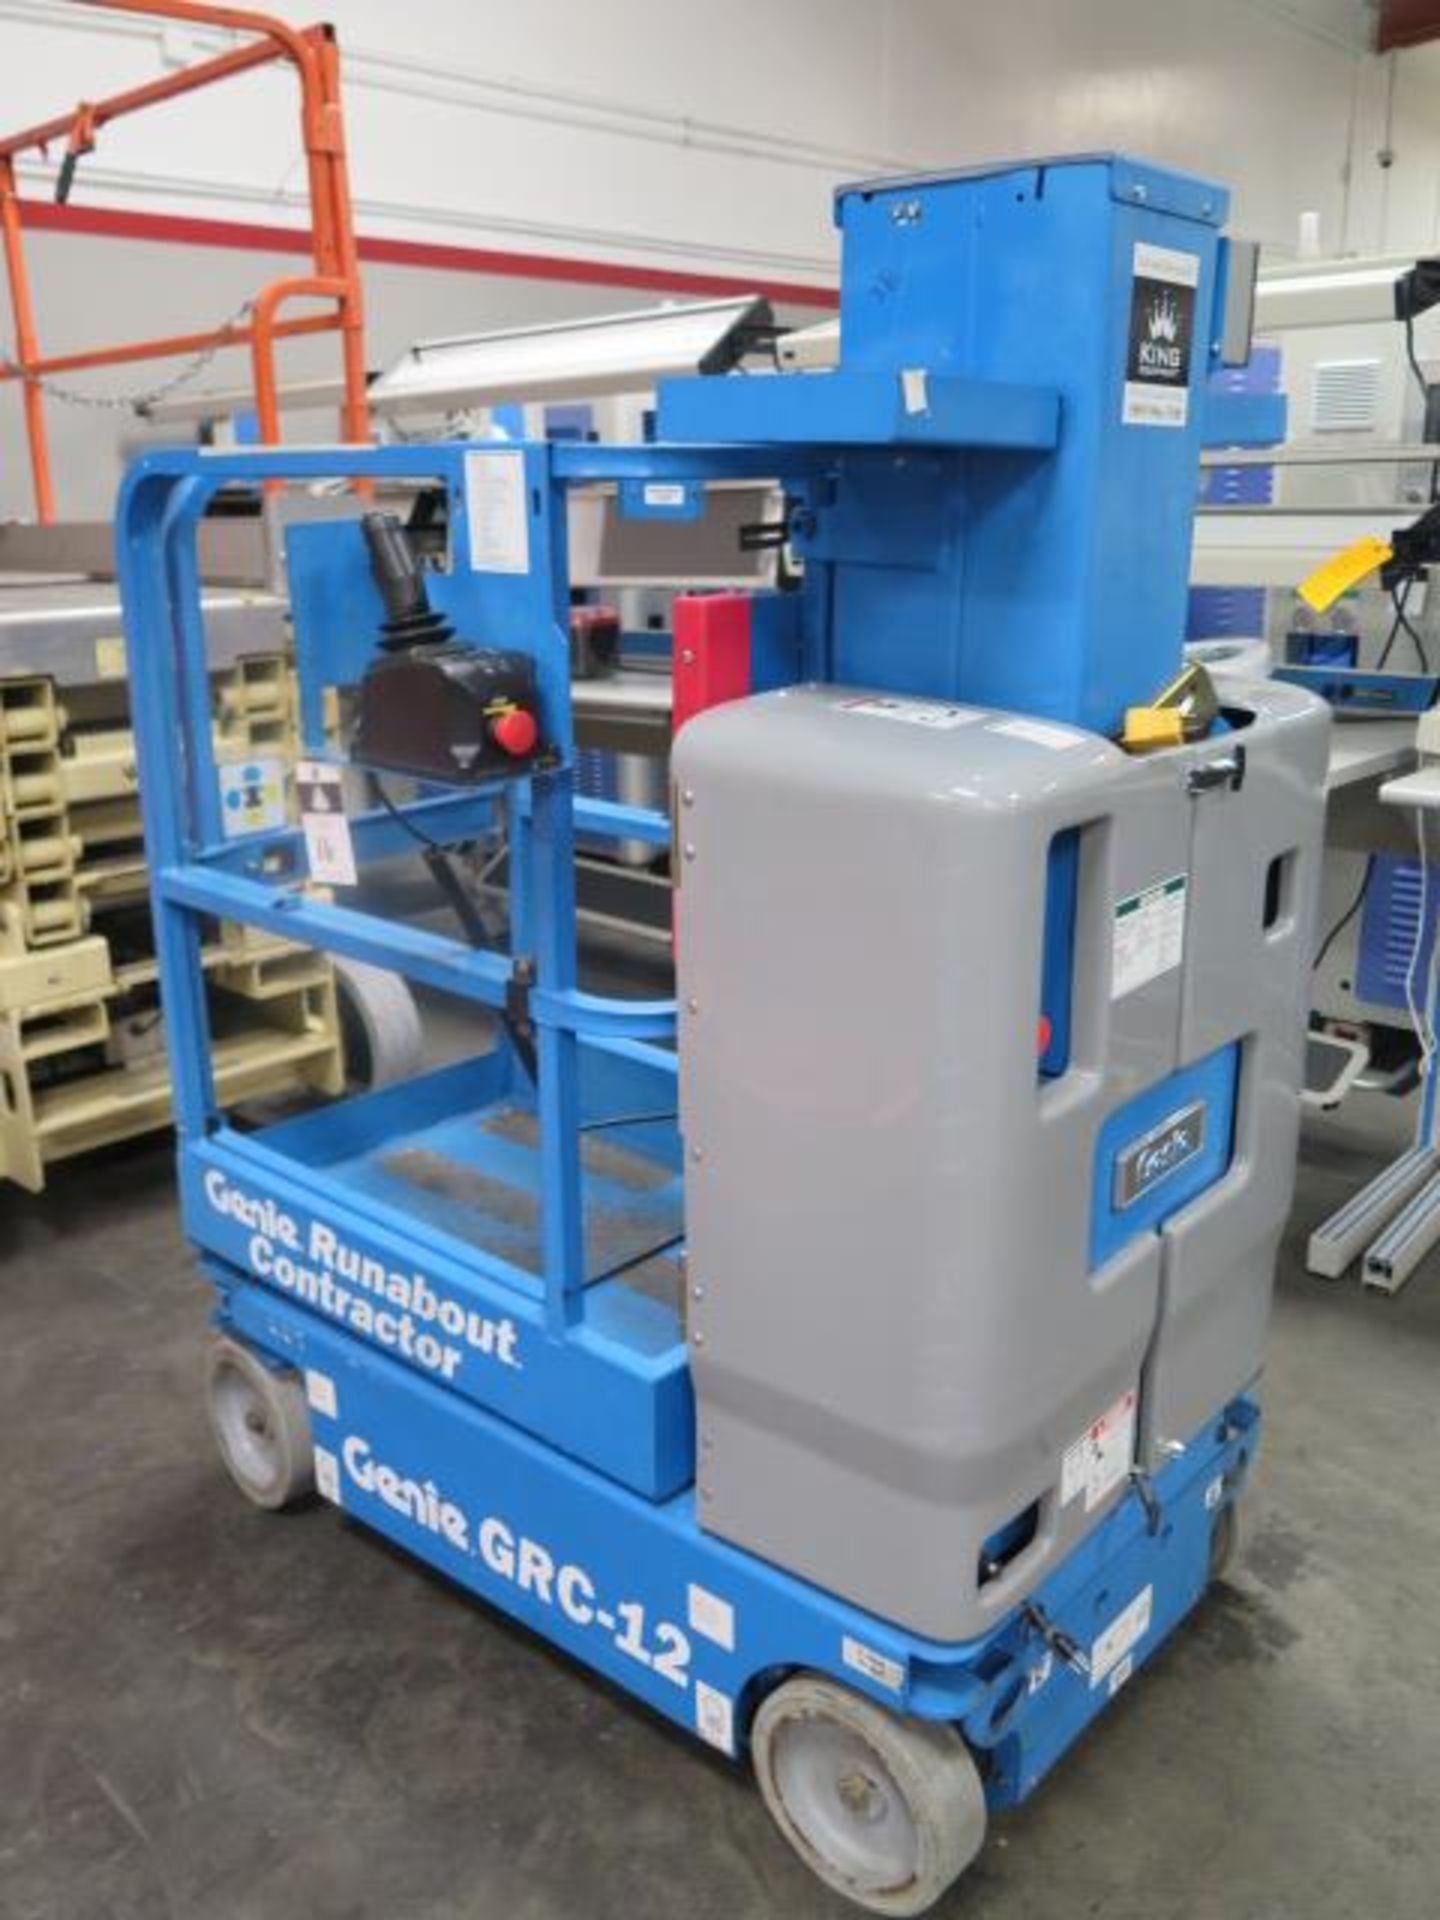 2010 Genie GRC-12 "Runabout Contractor" Electric Platform Lift s/n GRC10-315 w/ 12' Lift, SOLD AS IS - Image 3 of 14